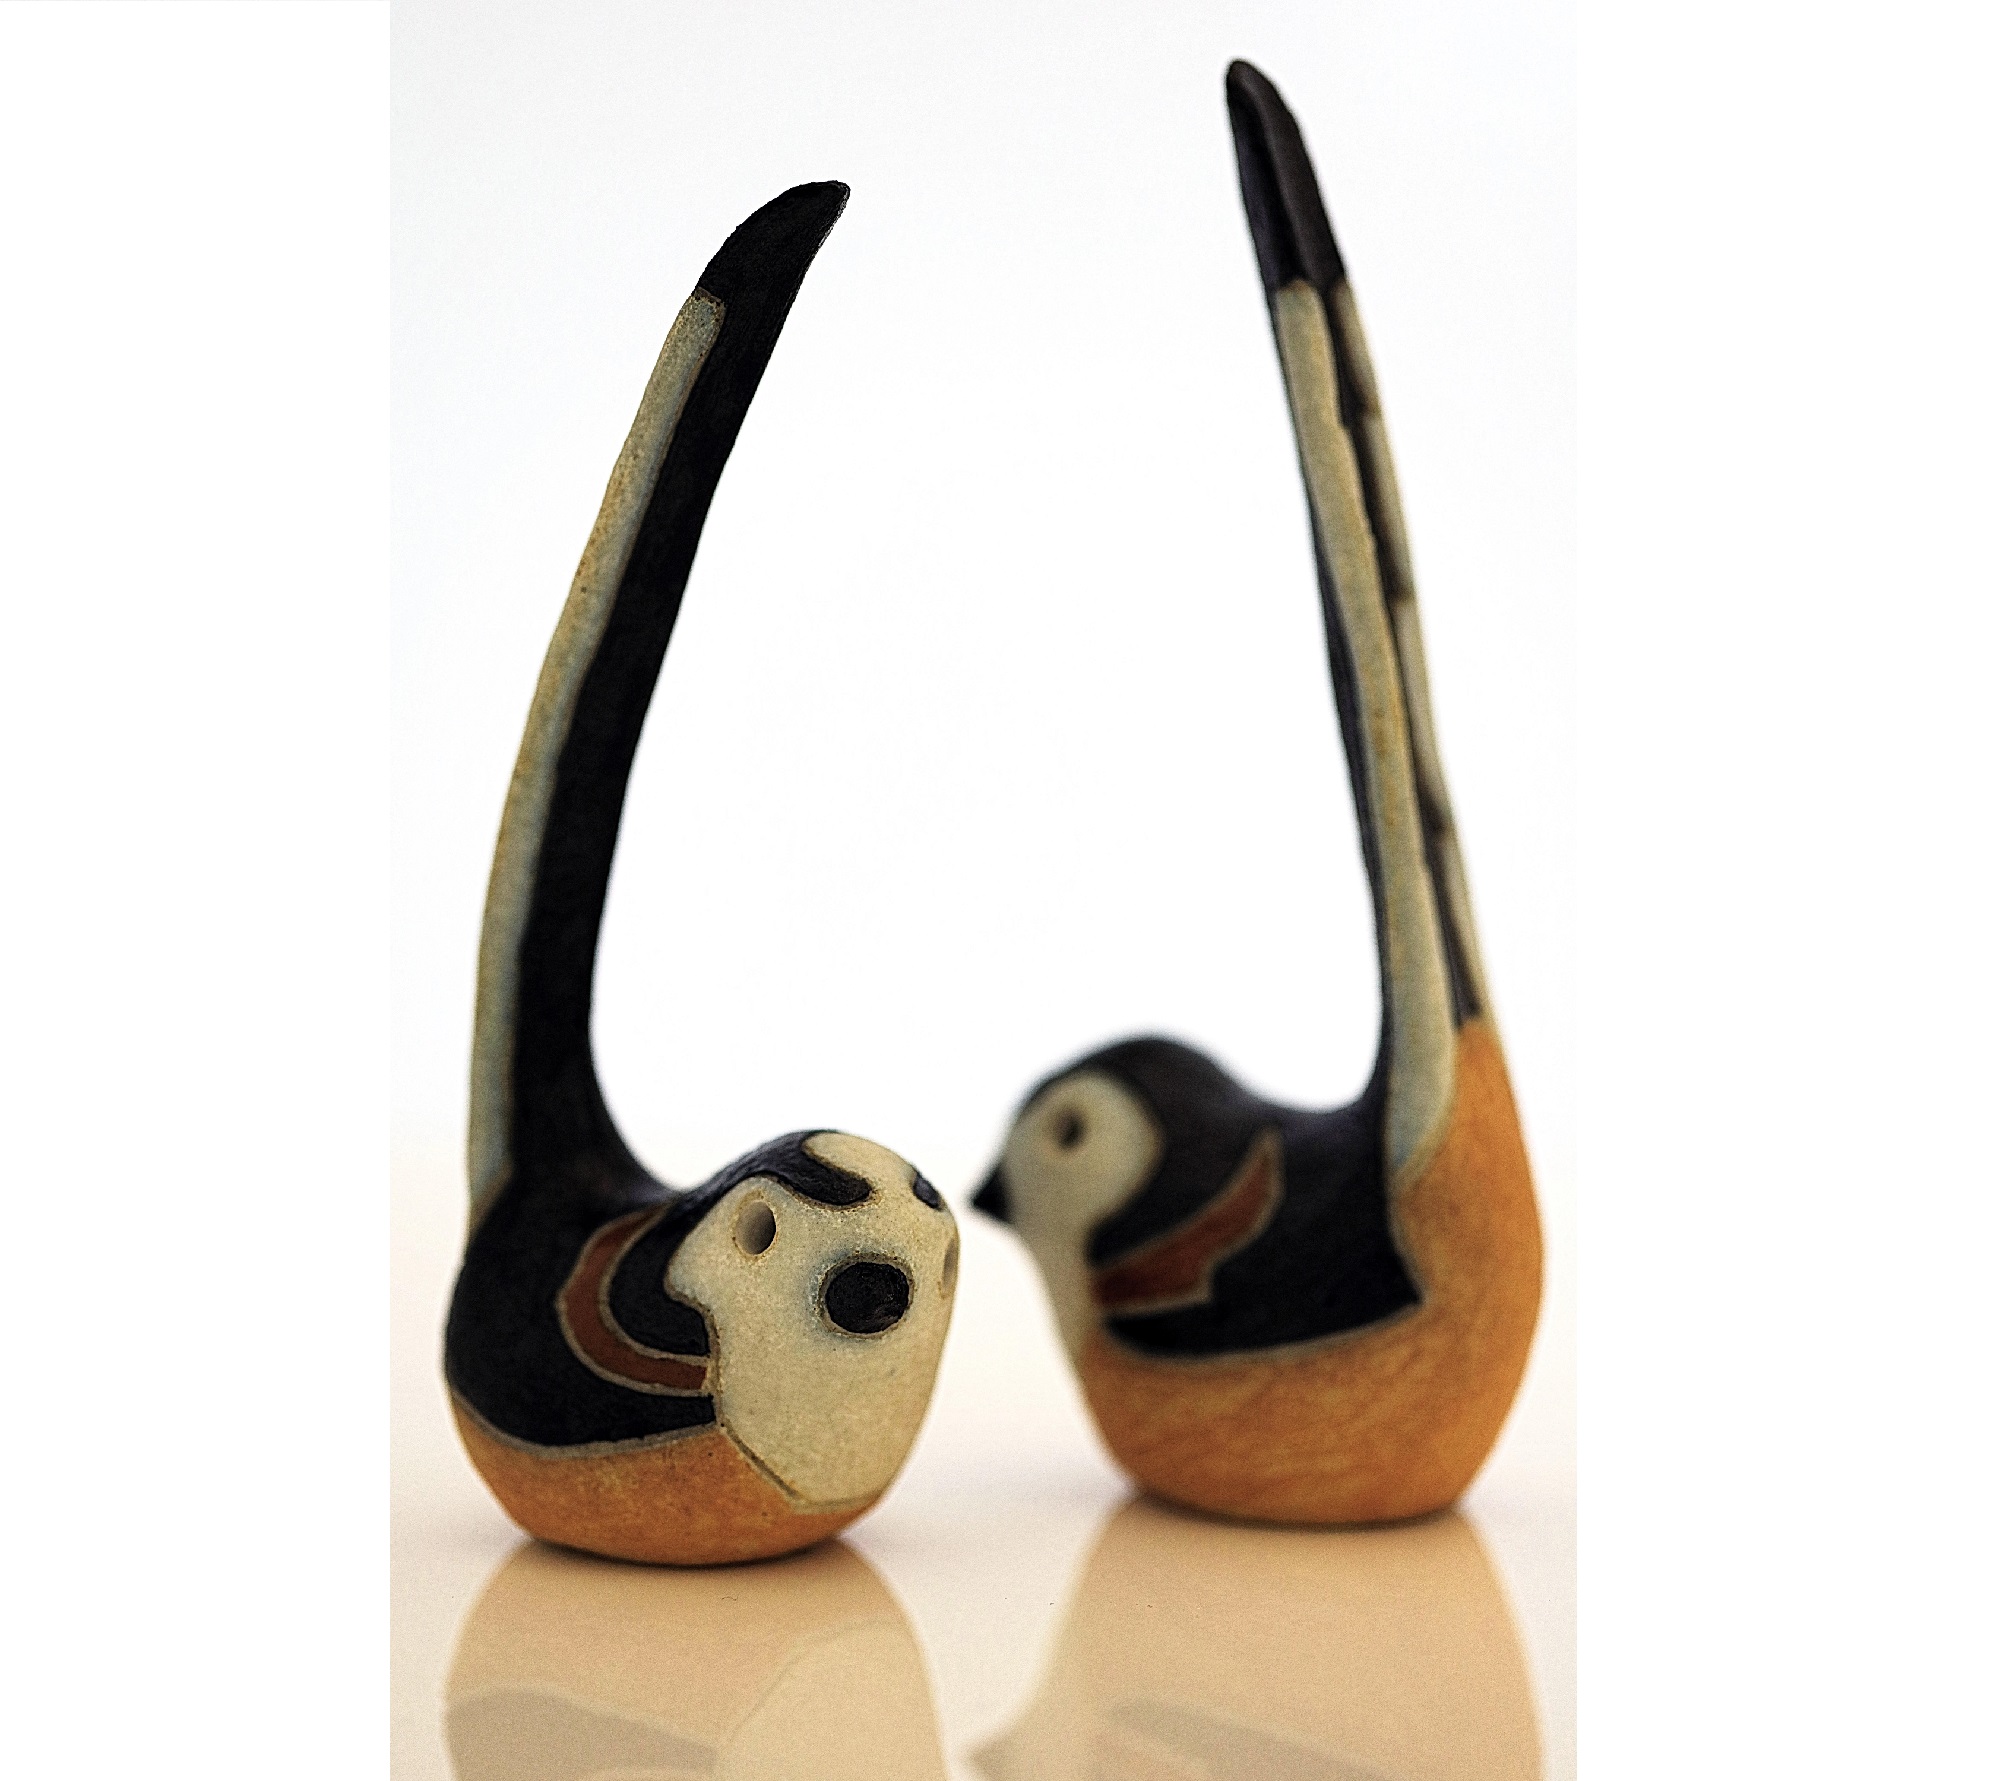 Long-tailed tits, just over life-size, with a black and white matt glaze. These were one of three pottery birds created in 1987 by Rosemary Wren and Peter Crotty from drawings from life.